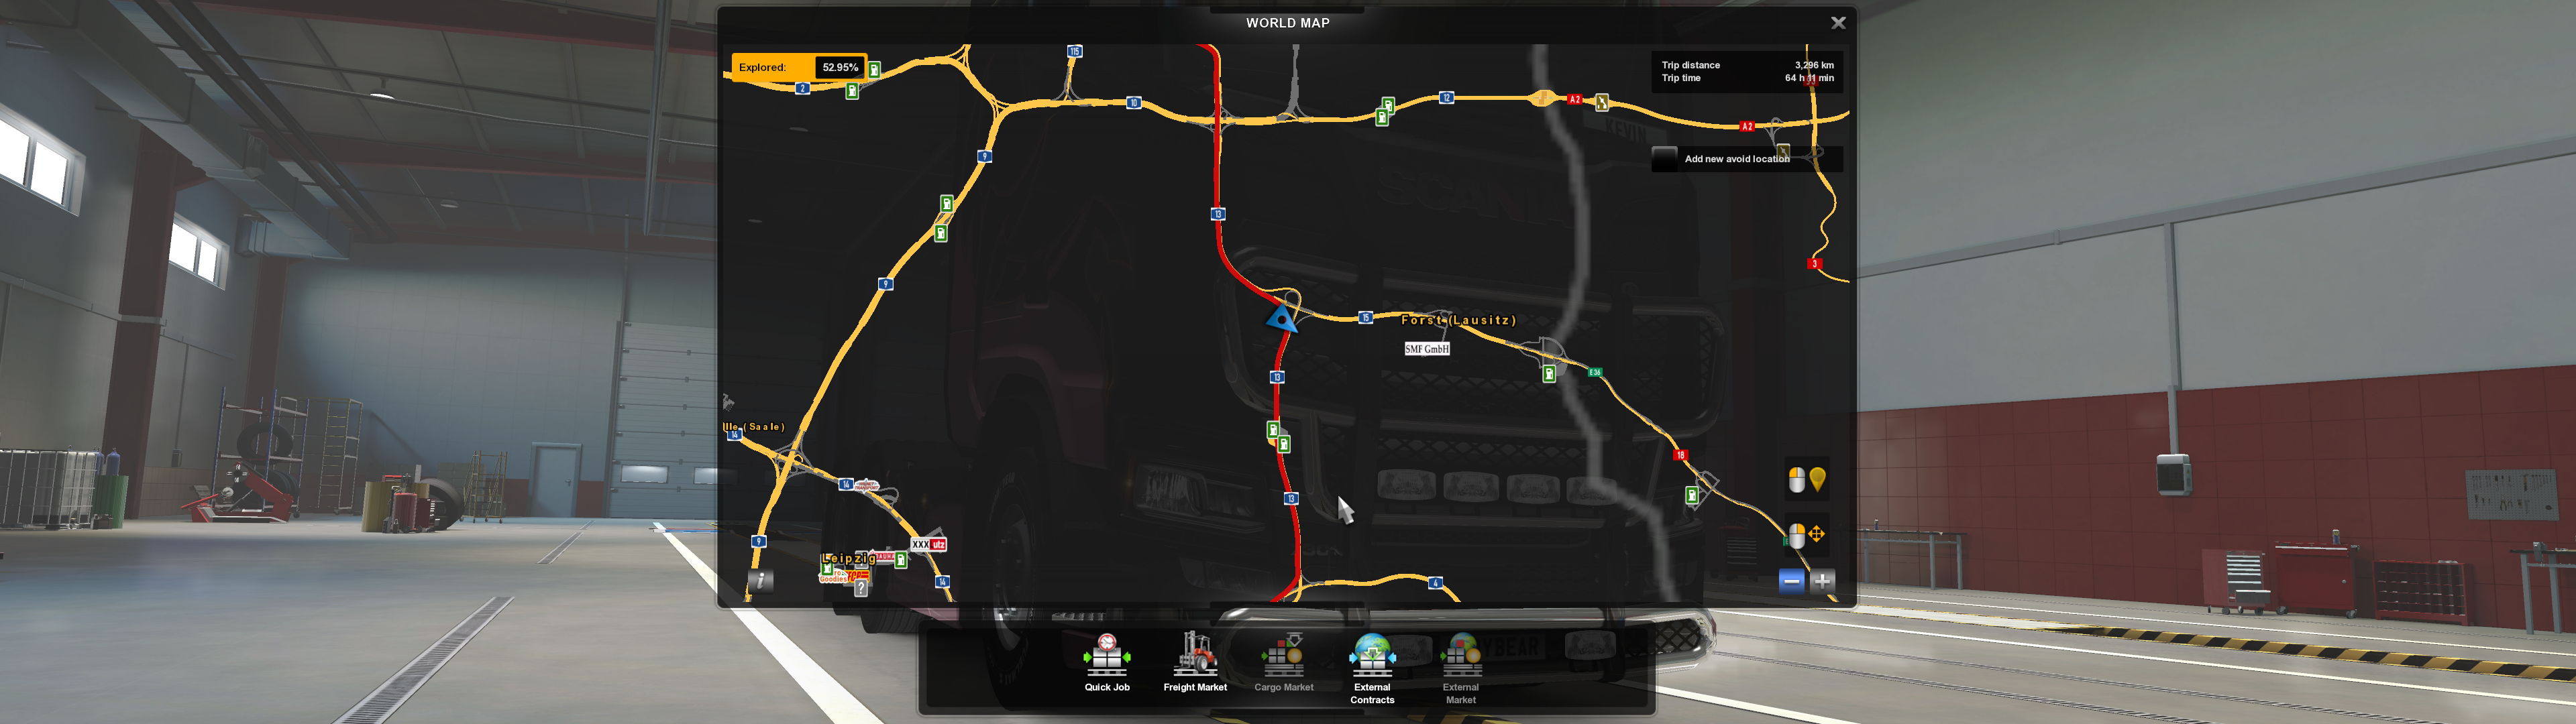 ets2_20210115_192020_00.png